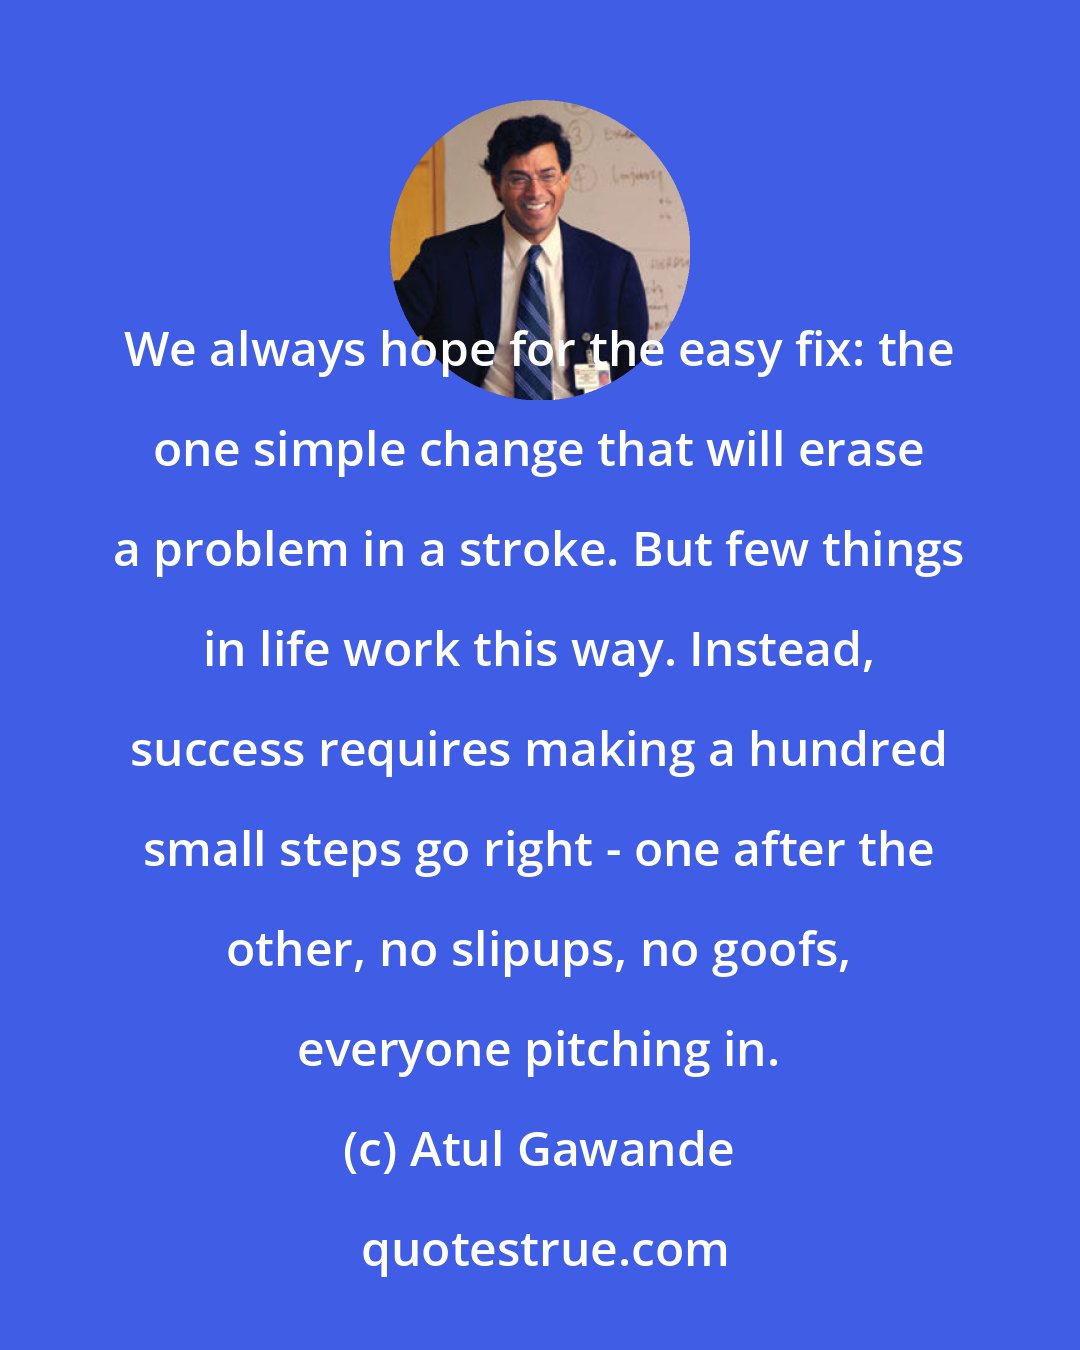 Atul Gawande: We always hope for the easy fix: the one simple change that will erase a problem in a stroke. But few things in life work this way. Instead, success requires making a hundred small steps go right - one after the other, no slipups, no goofs, everyone pitching in.